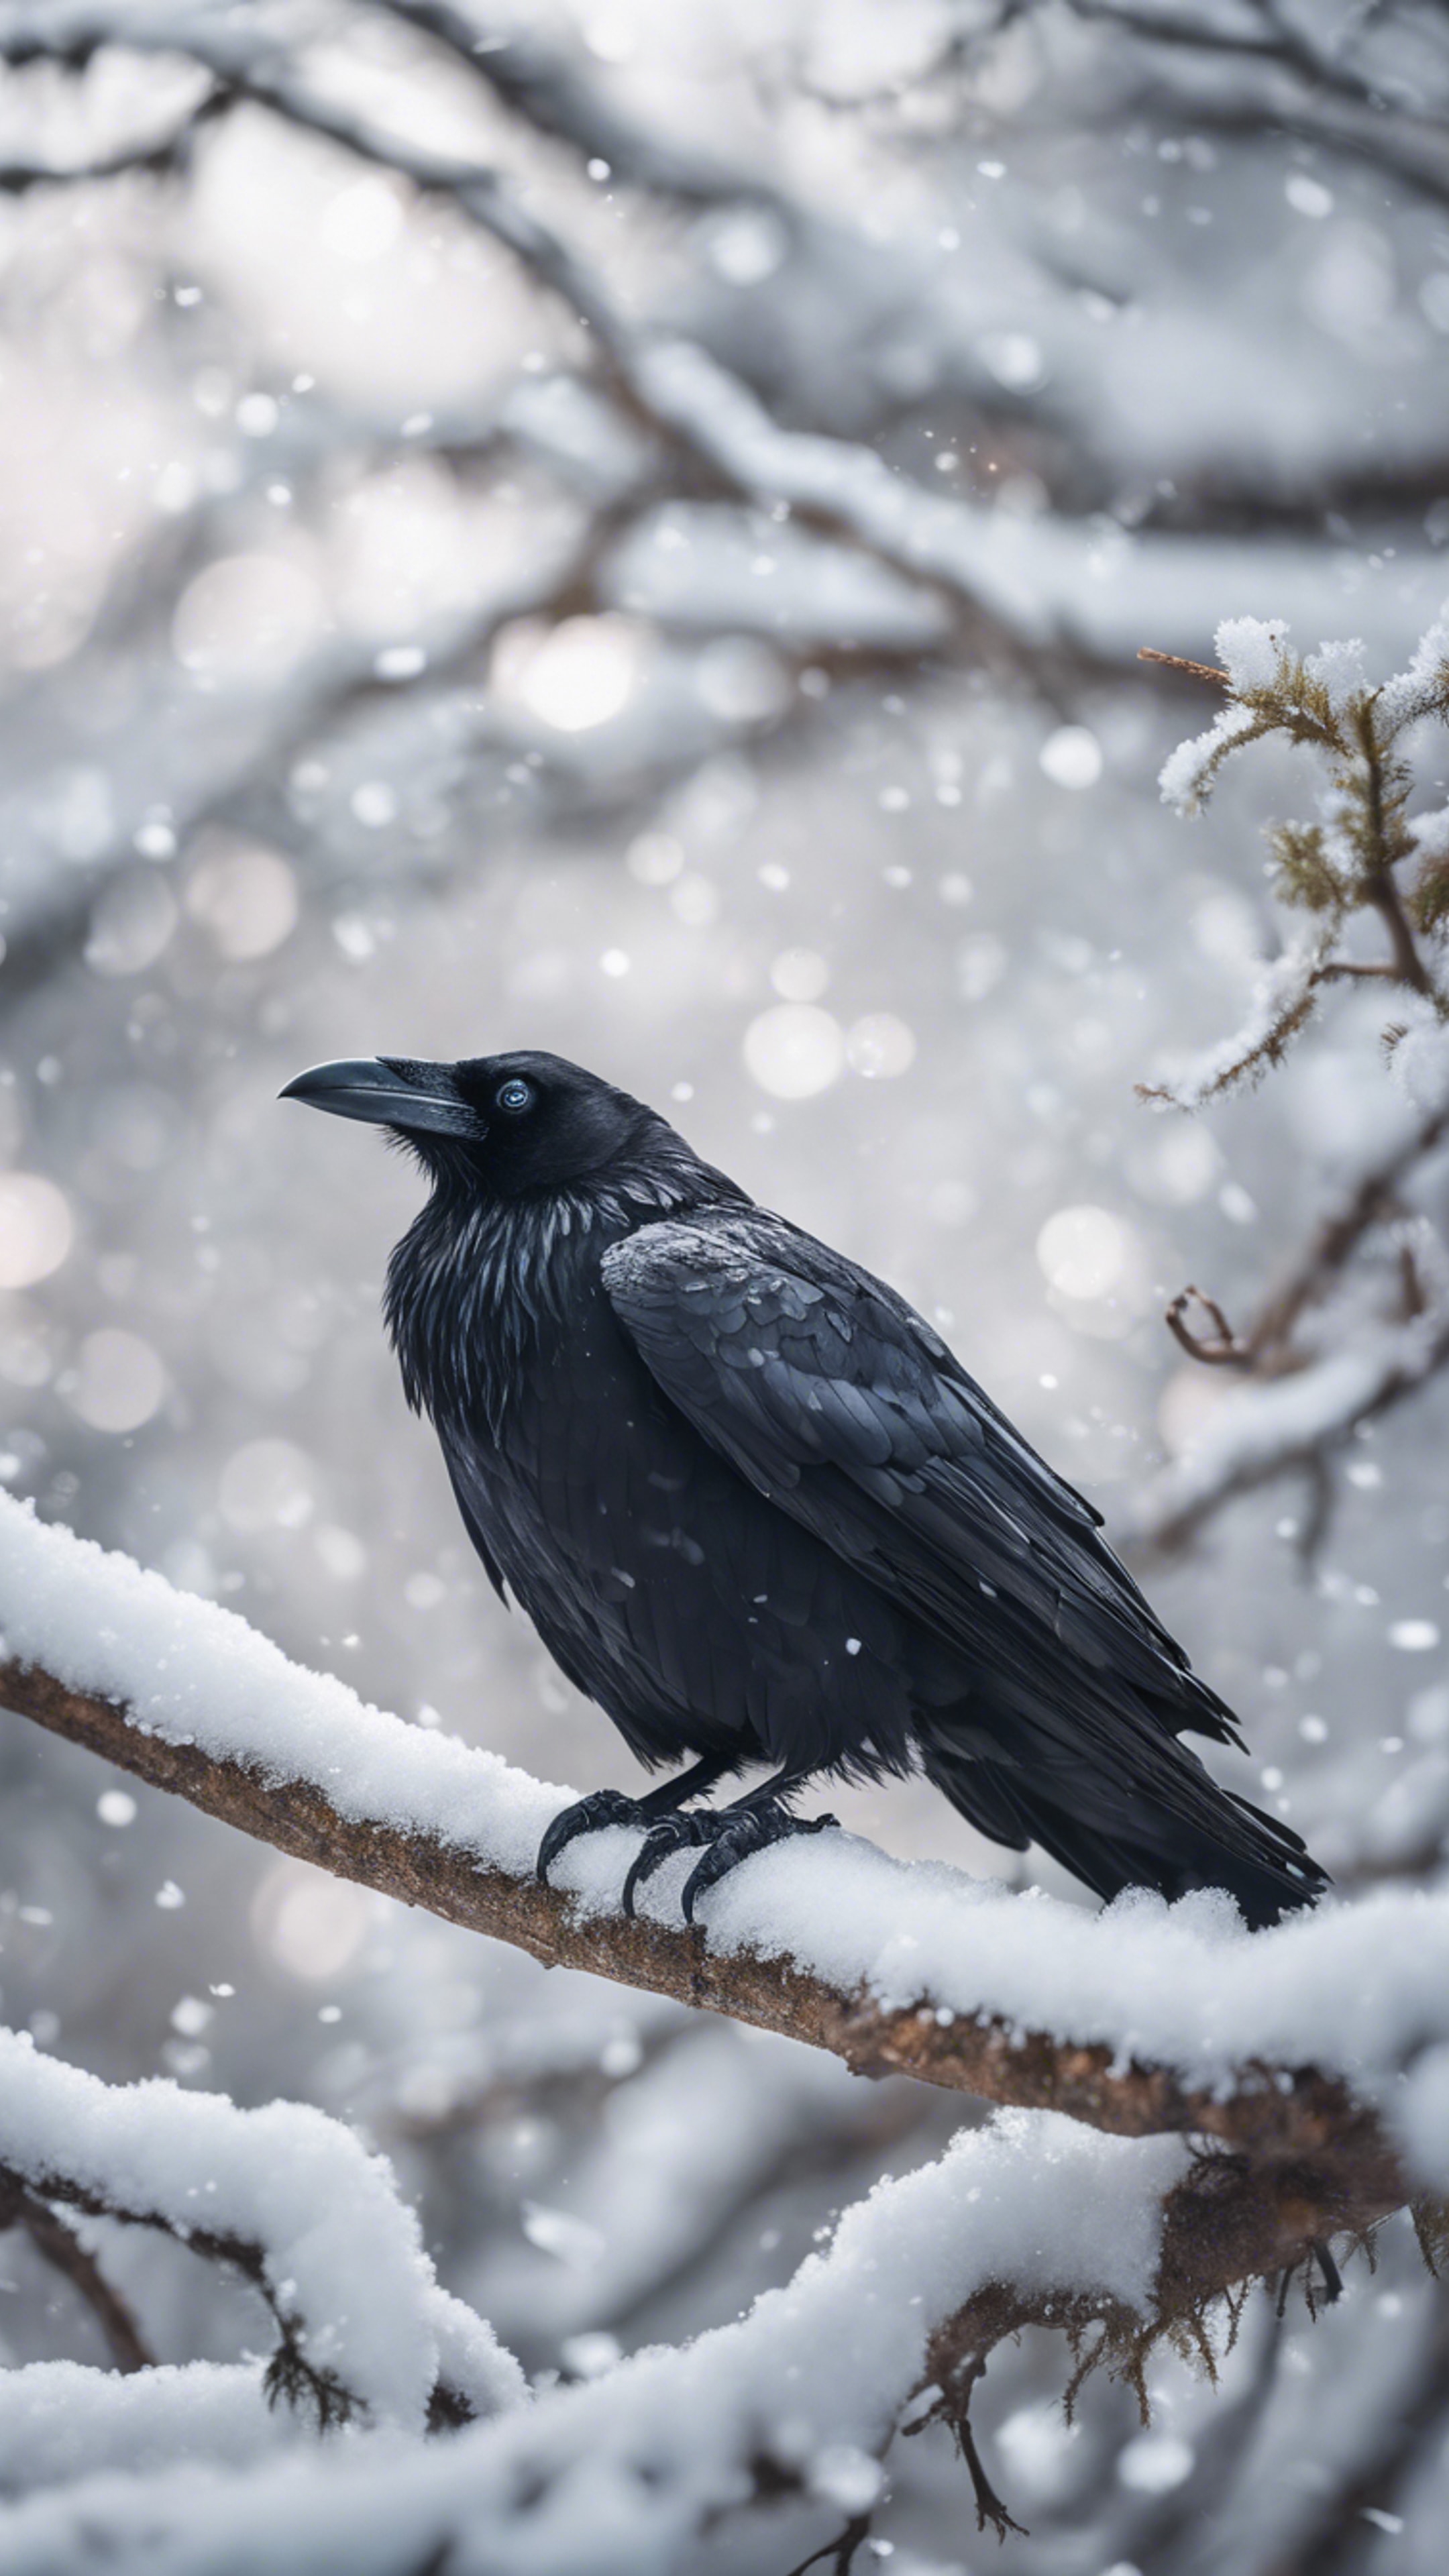 A mysterious black raven perched on a stark, white snow covered branch.壁紙[9249f7444d554026acd7]